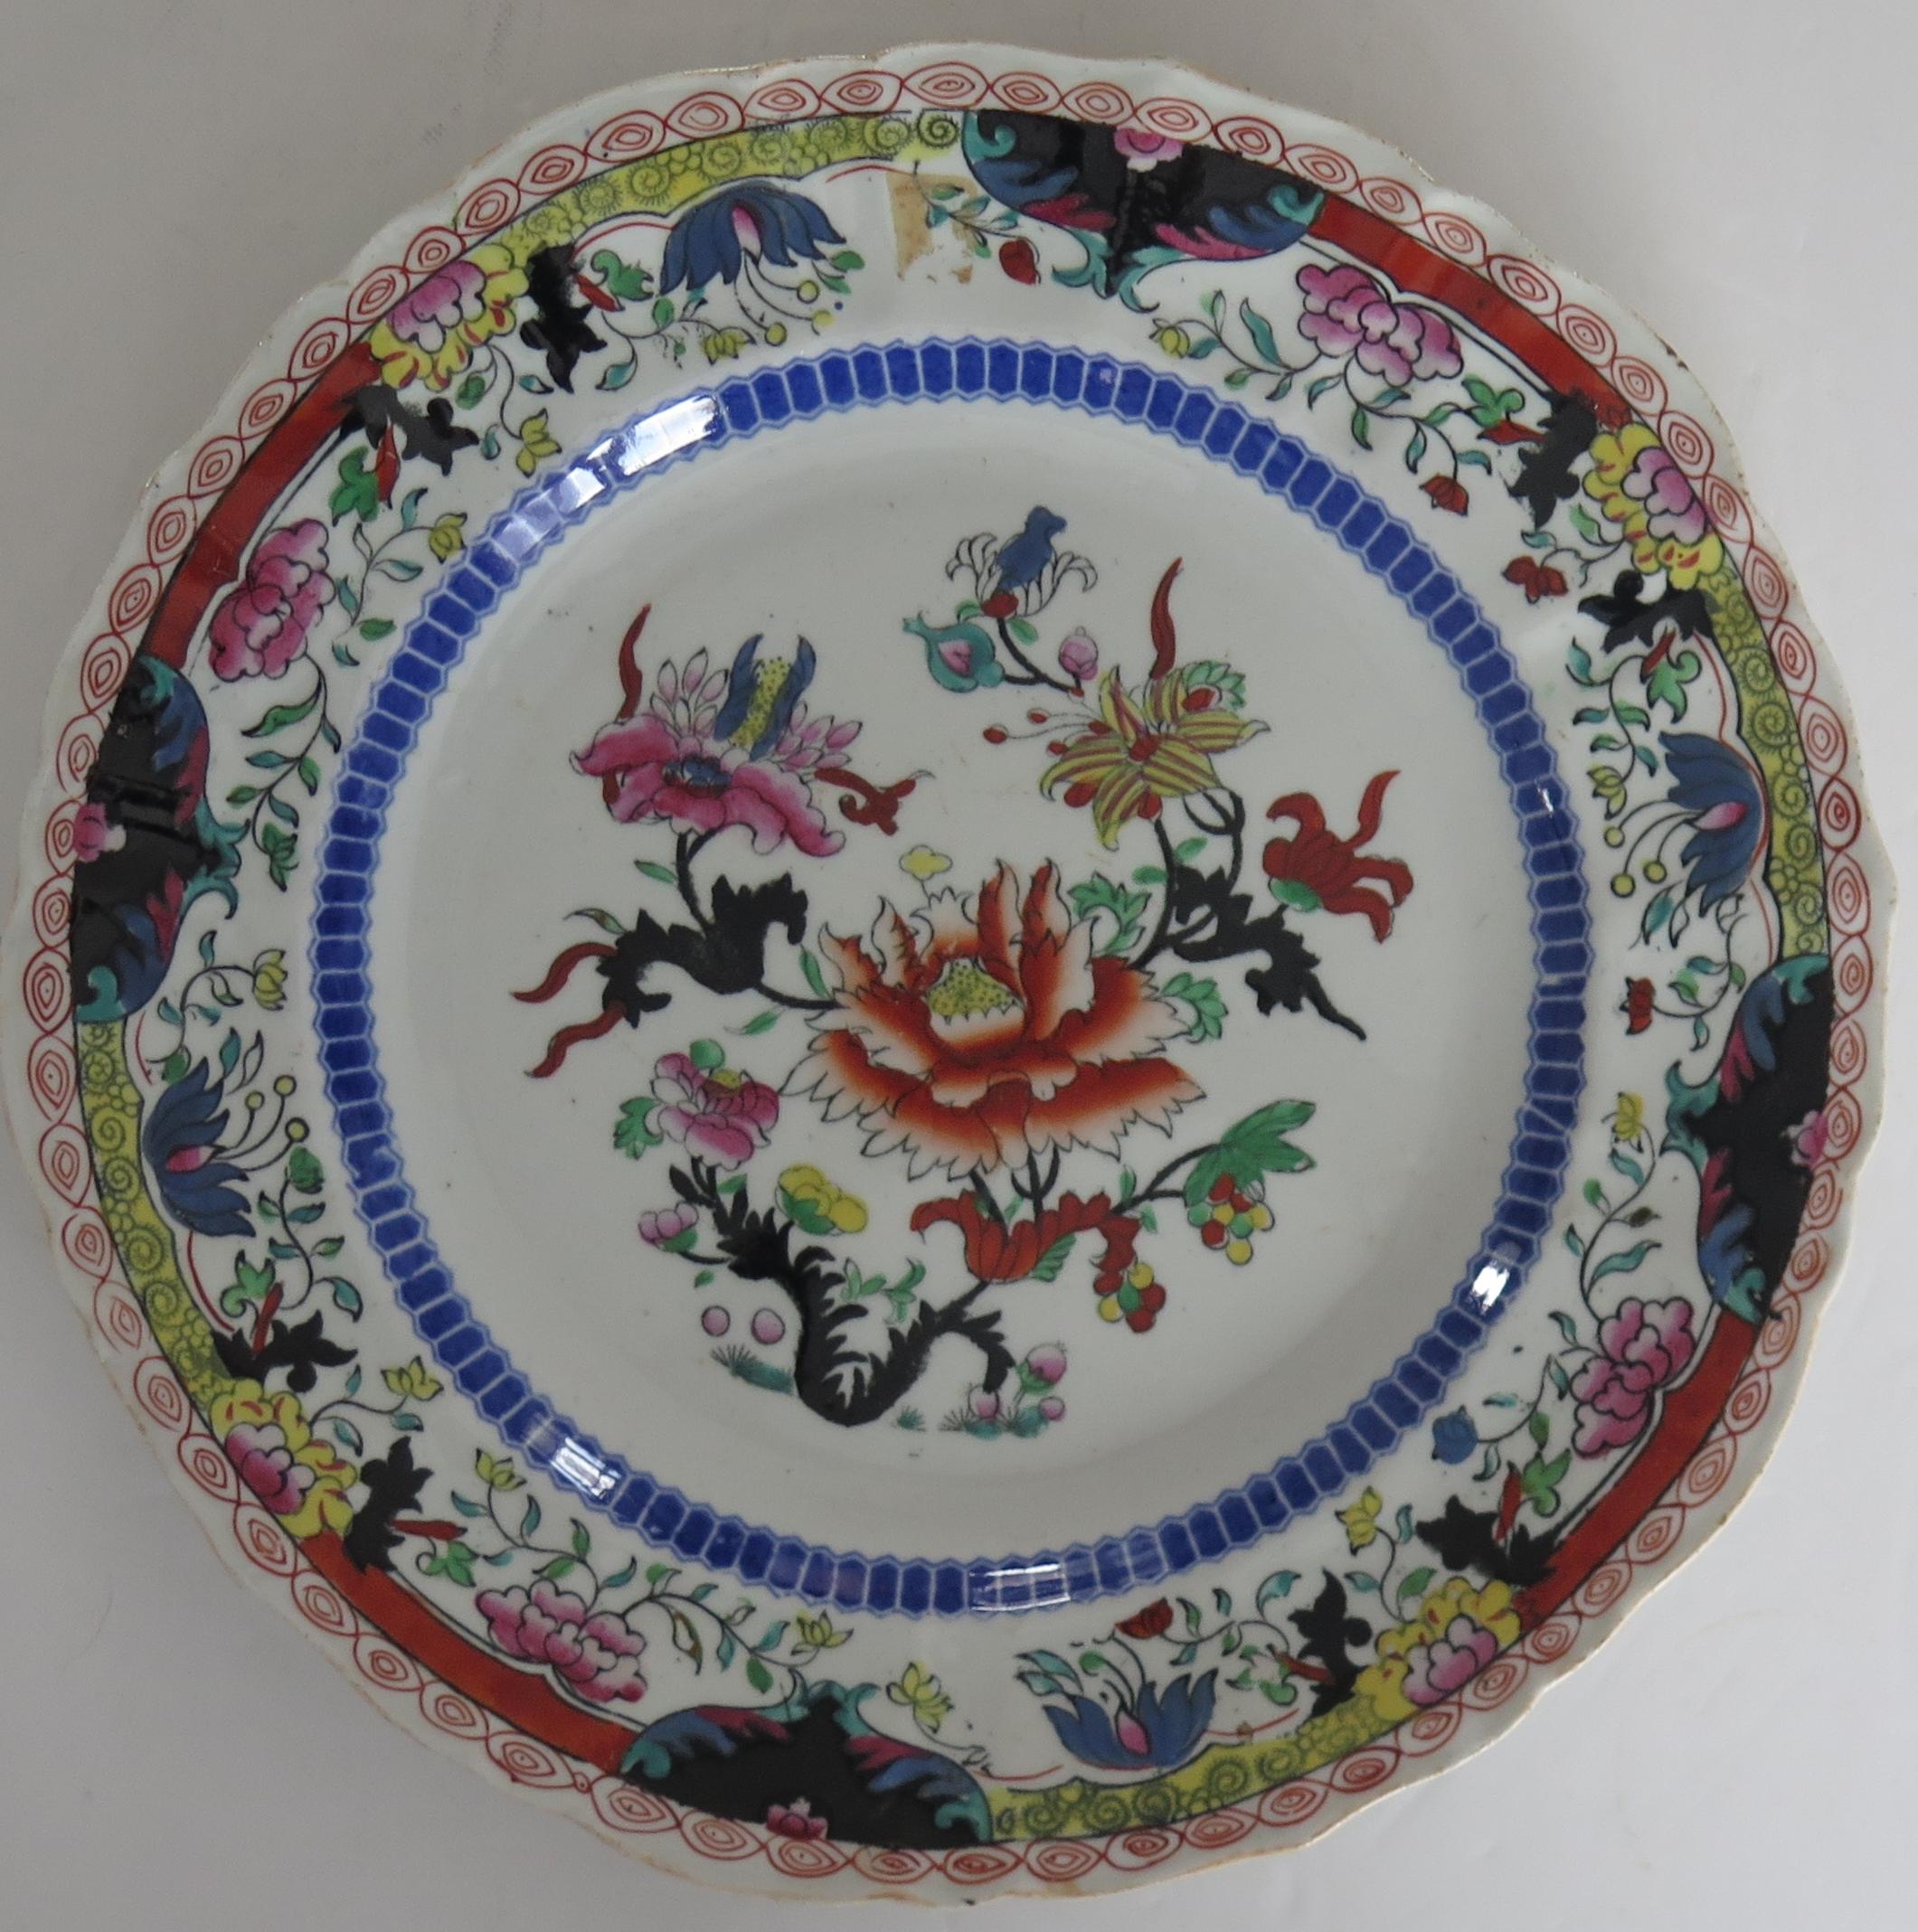 This Ironstone pottery large dinner plate was made by the Mason's factory at Lane Delph, Staffordshire, England and is decorated in the Ragged Rose Pattern, dating to the 19th Century, Circa 1830 

This is a rare pattern.

The design is one of